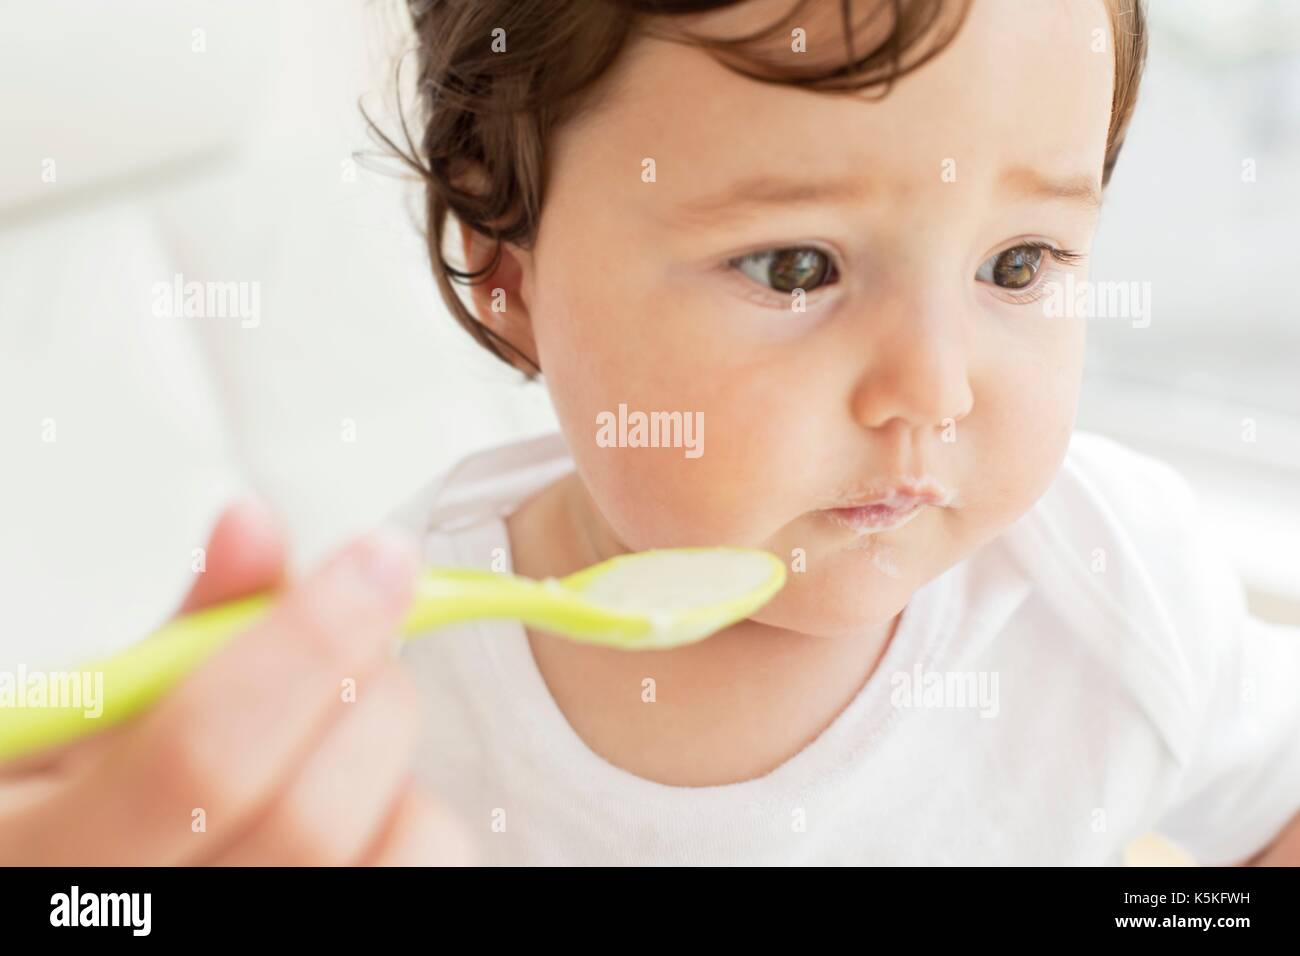 Female toddler being spoon fed. Stock Photo